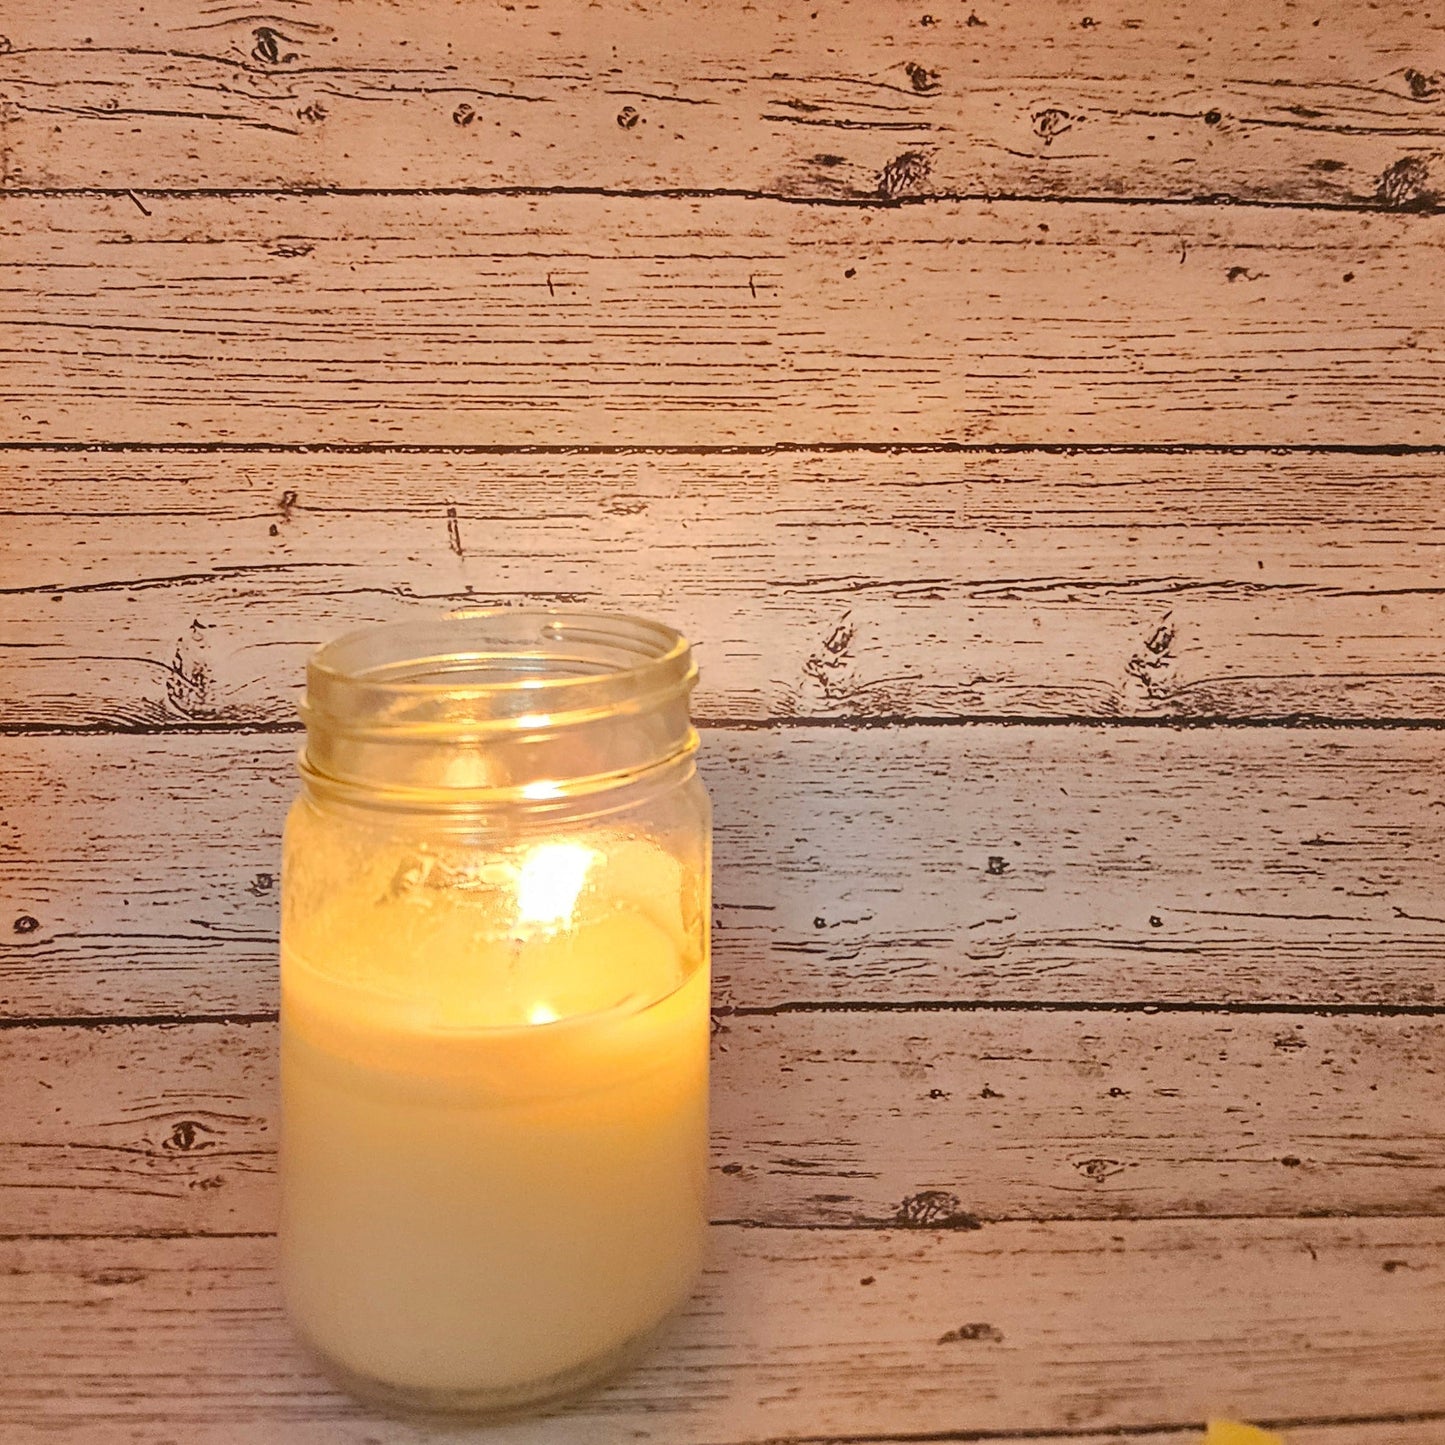 White Linen 100% Soy Candle 10 oz. Small Batch | USA Ingredients